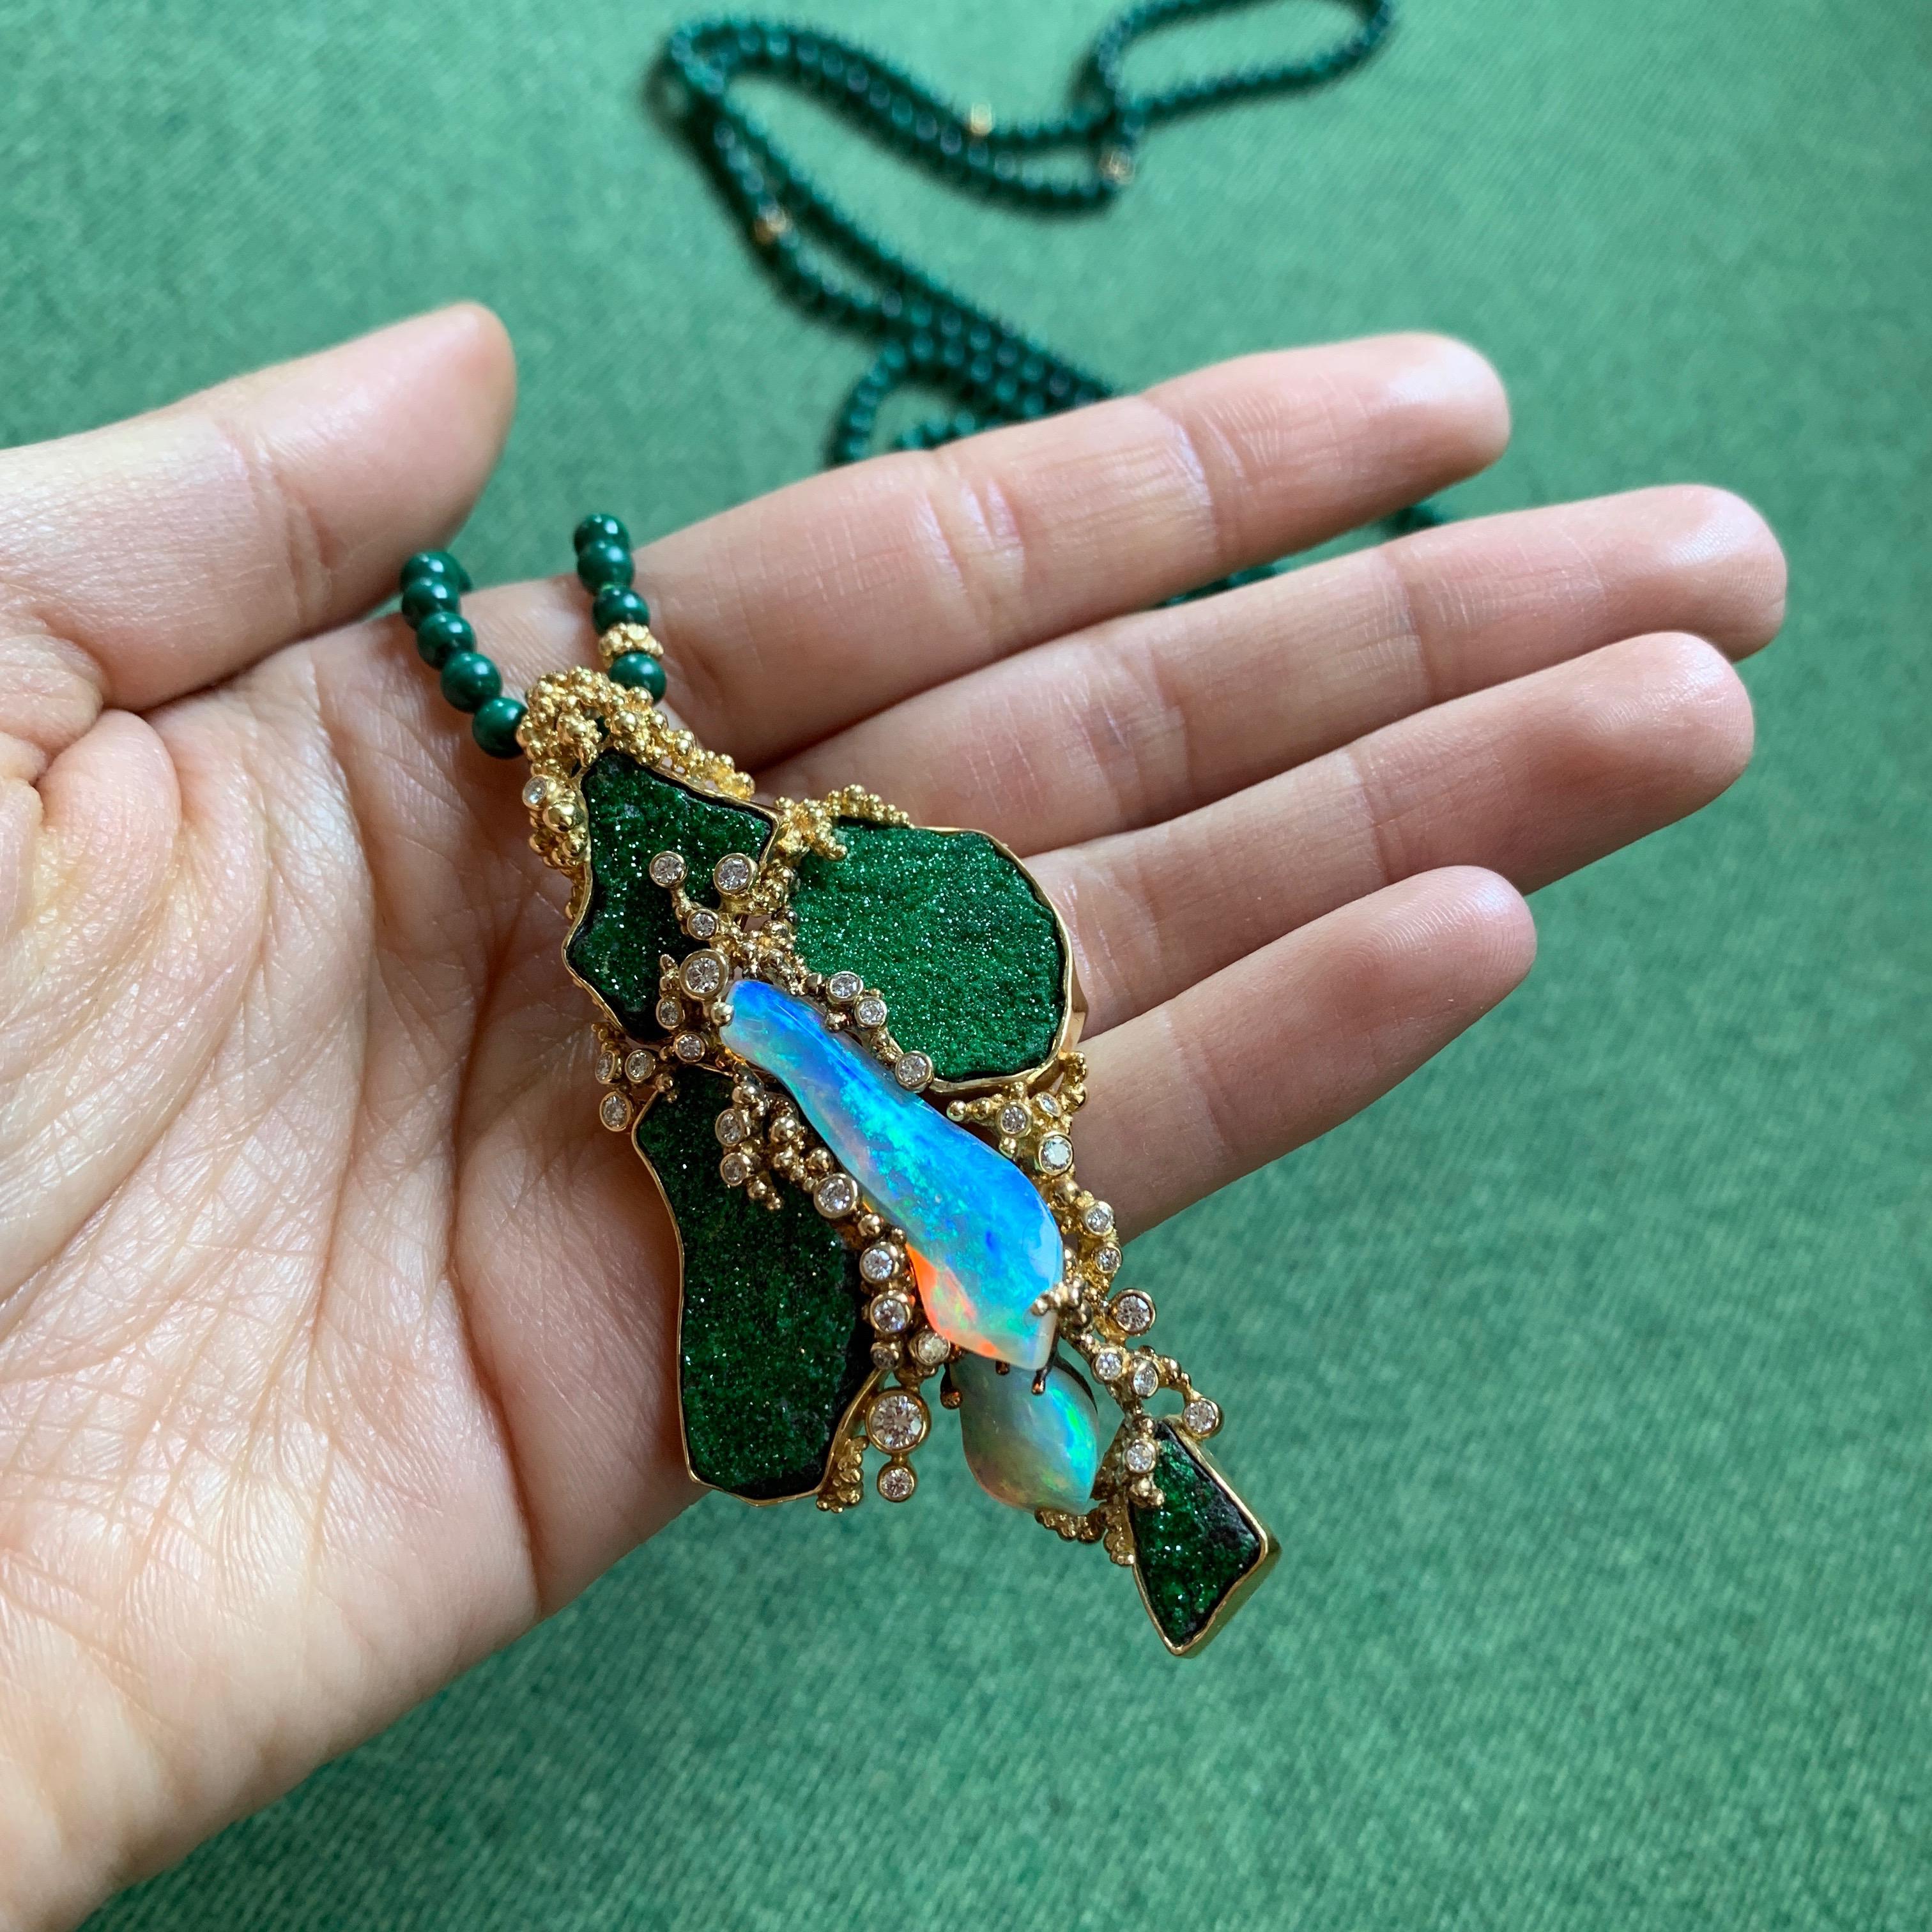 An exquisite diamond, malachite, opal and 18 karat gold long necklace, with detachable brooch/pendant, by the important Swiss jeweler Gilbert Albert, c. 1970.

The necklace measures approximately 15.5